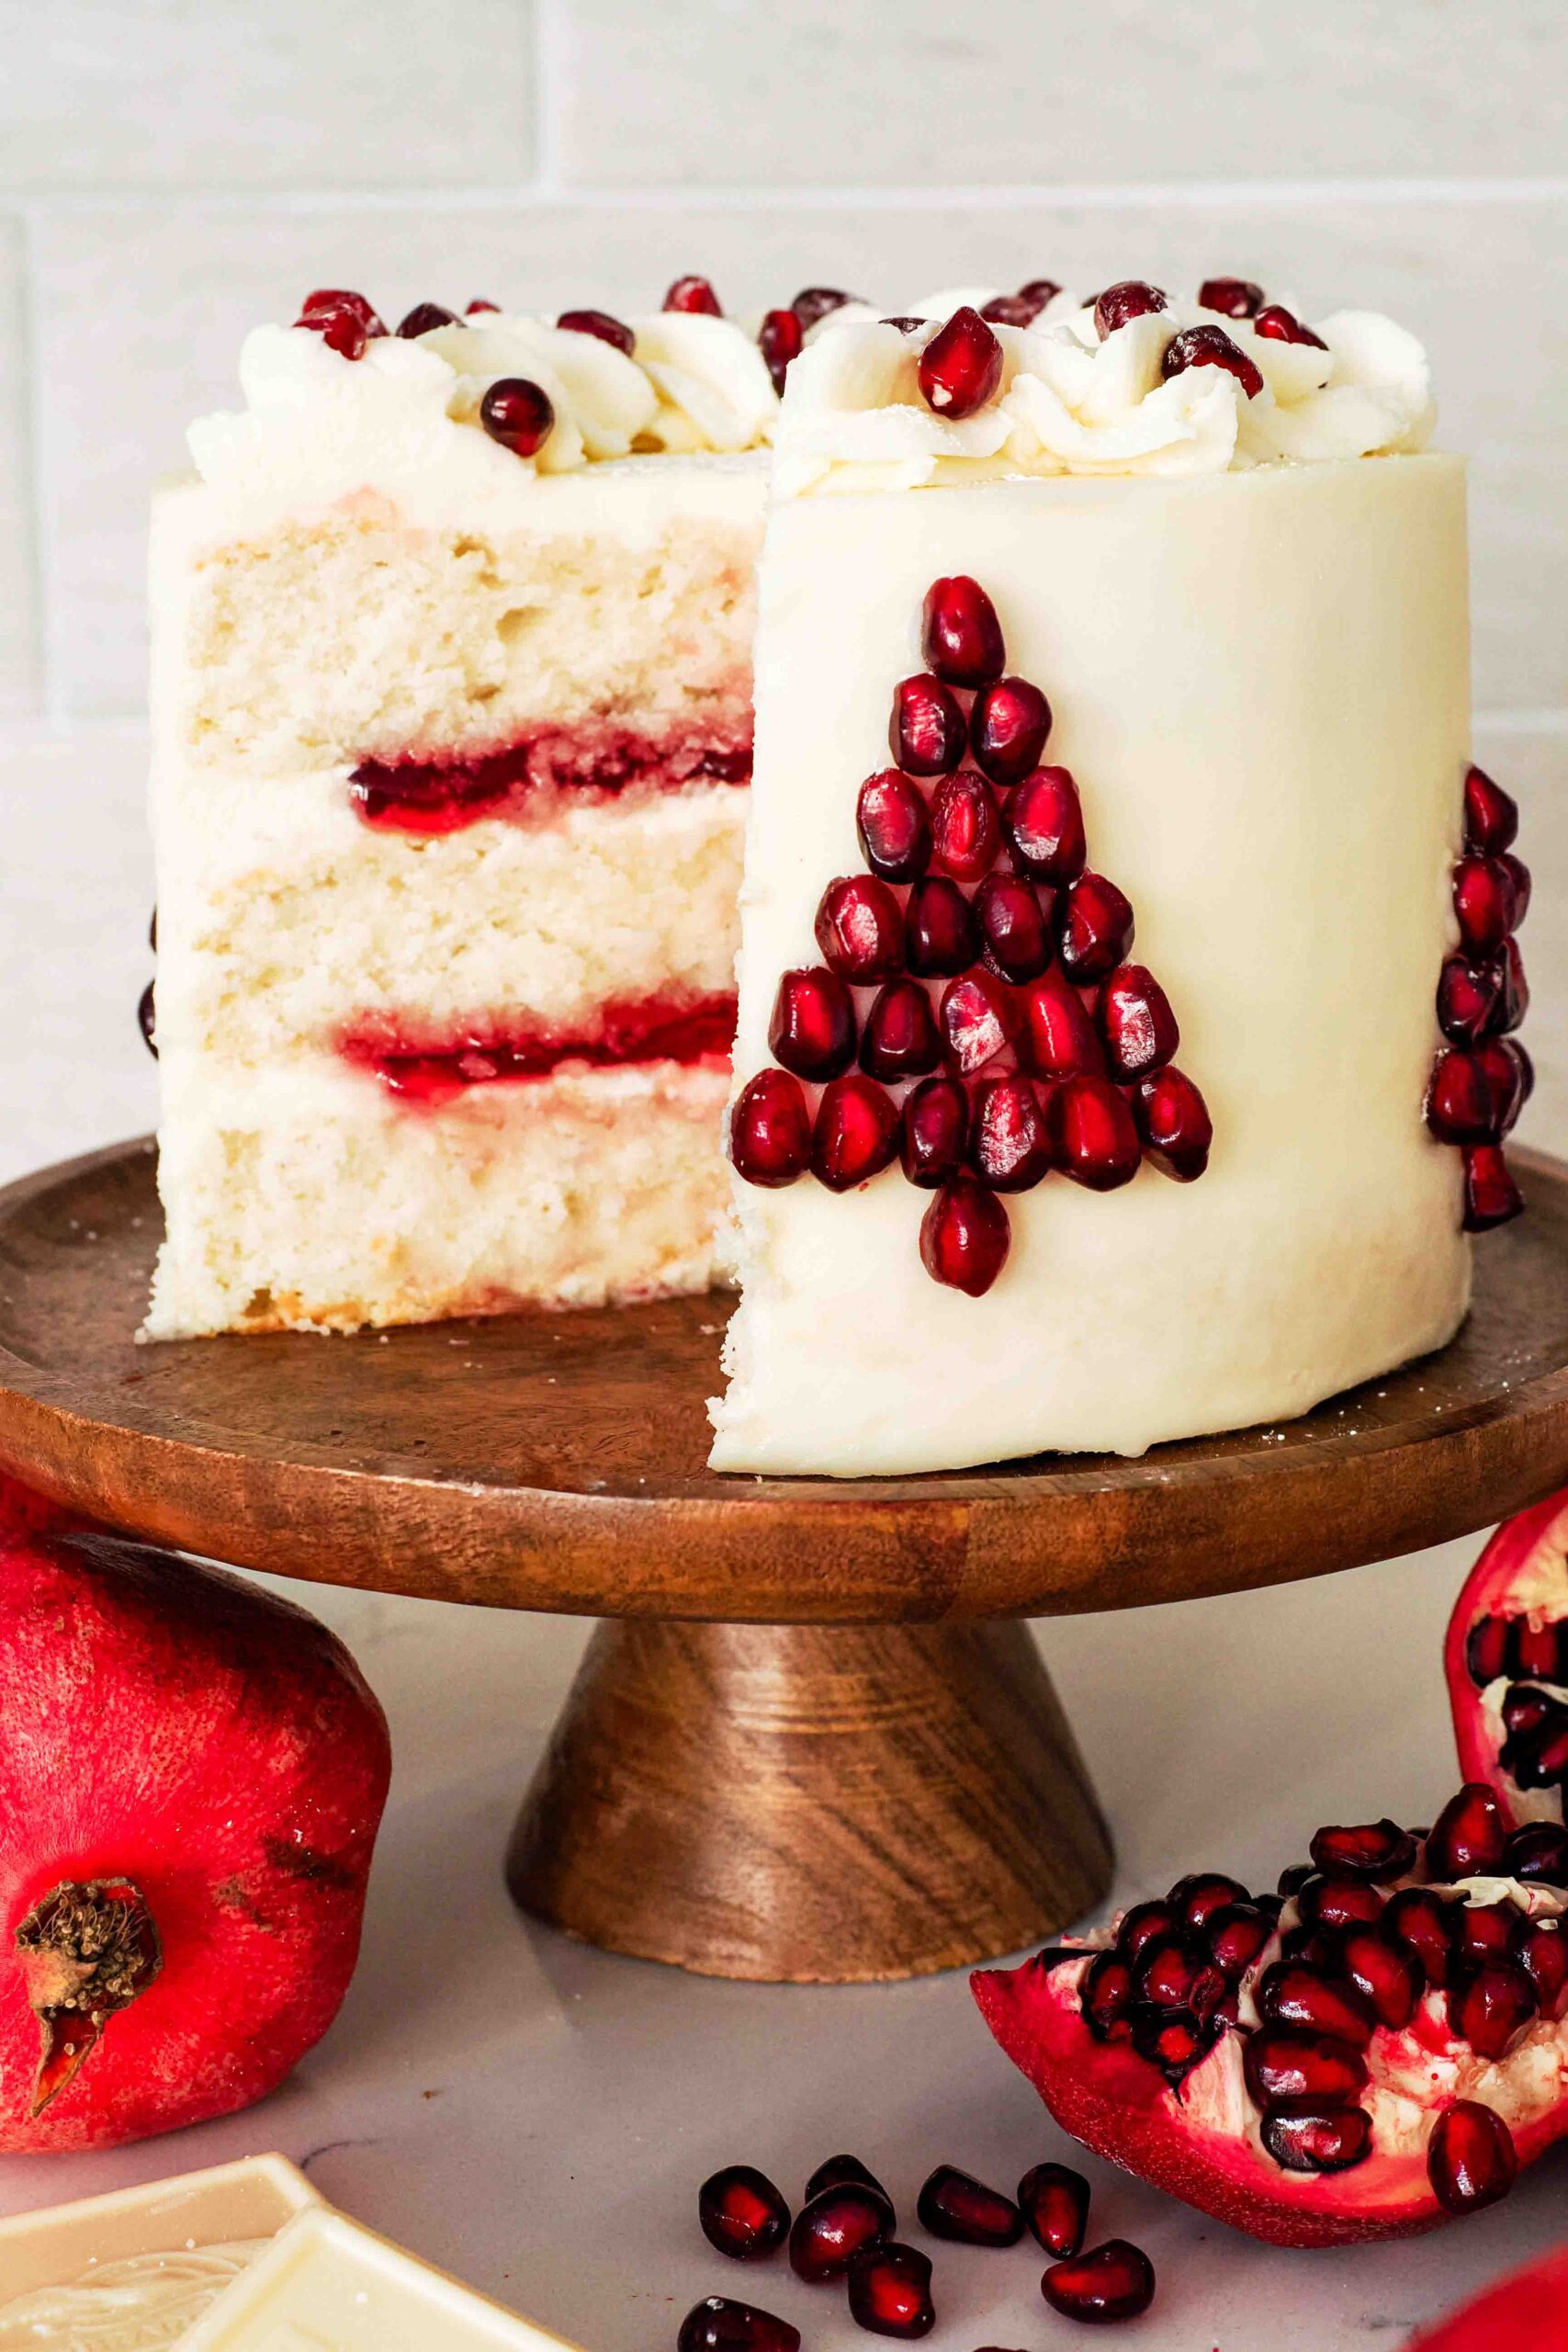 A white layer cake filled with pomegranate jelly, frosted with white chocolate buttercream, and decorated with pomegranate seeds in the shape of a Christmas tree.